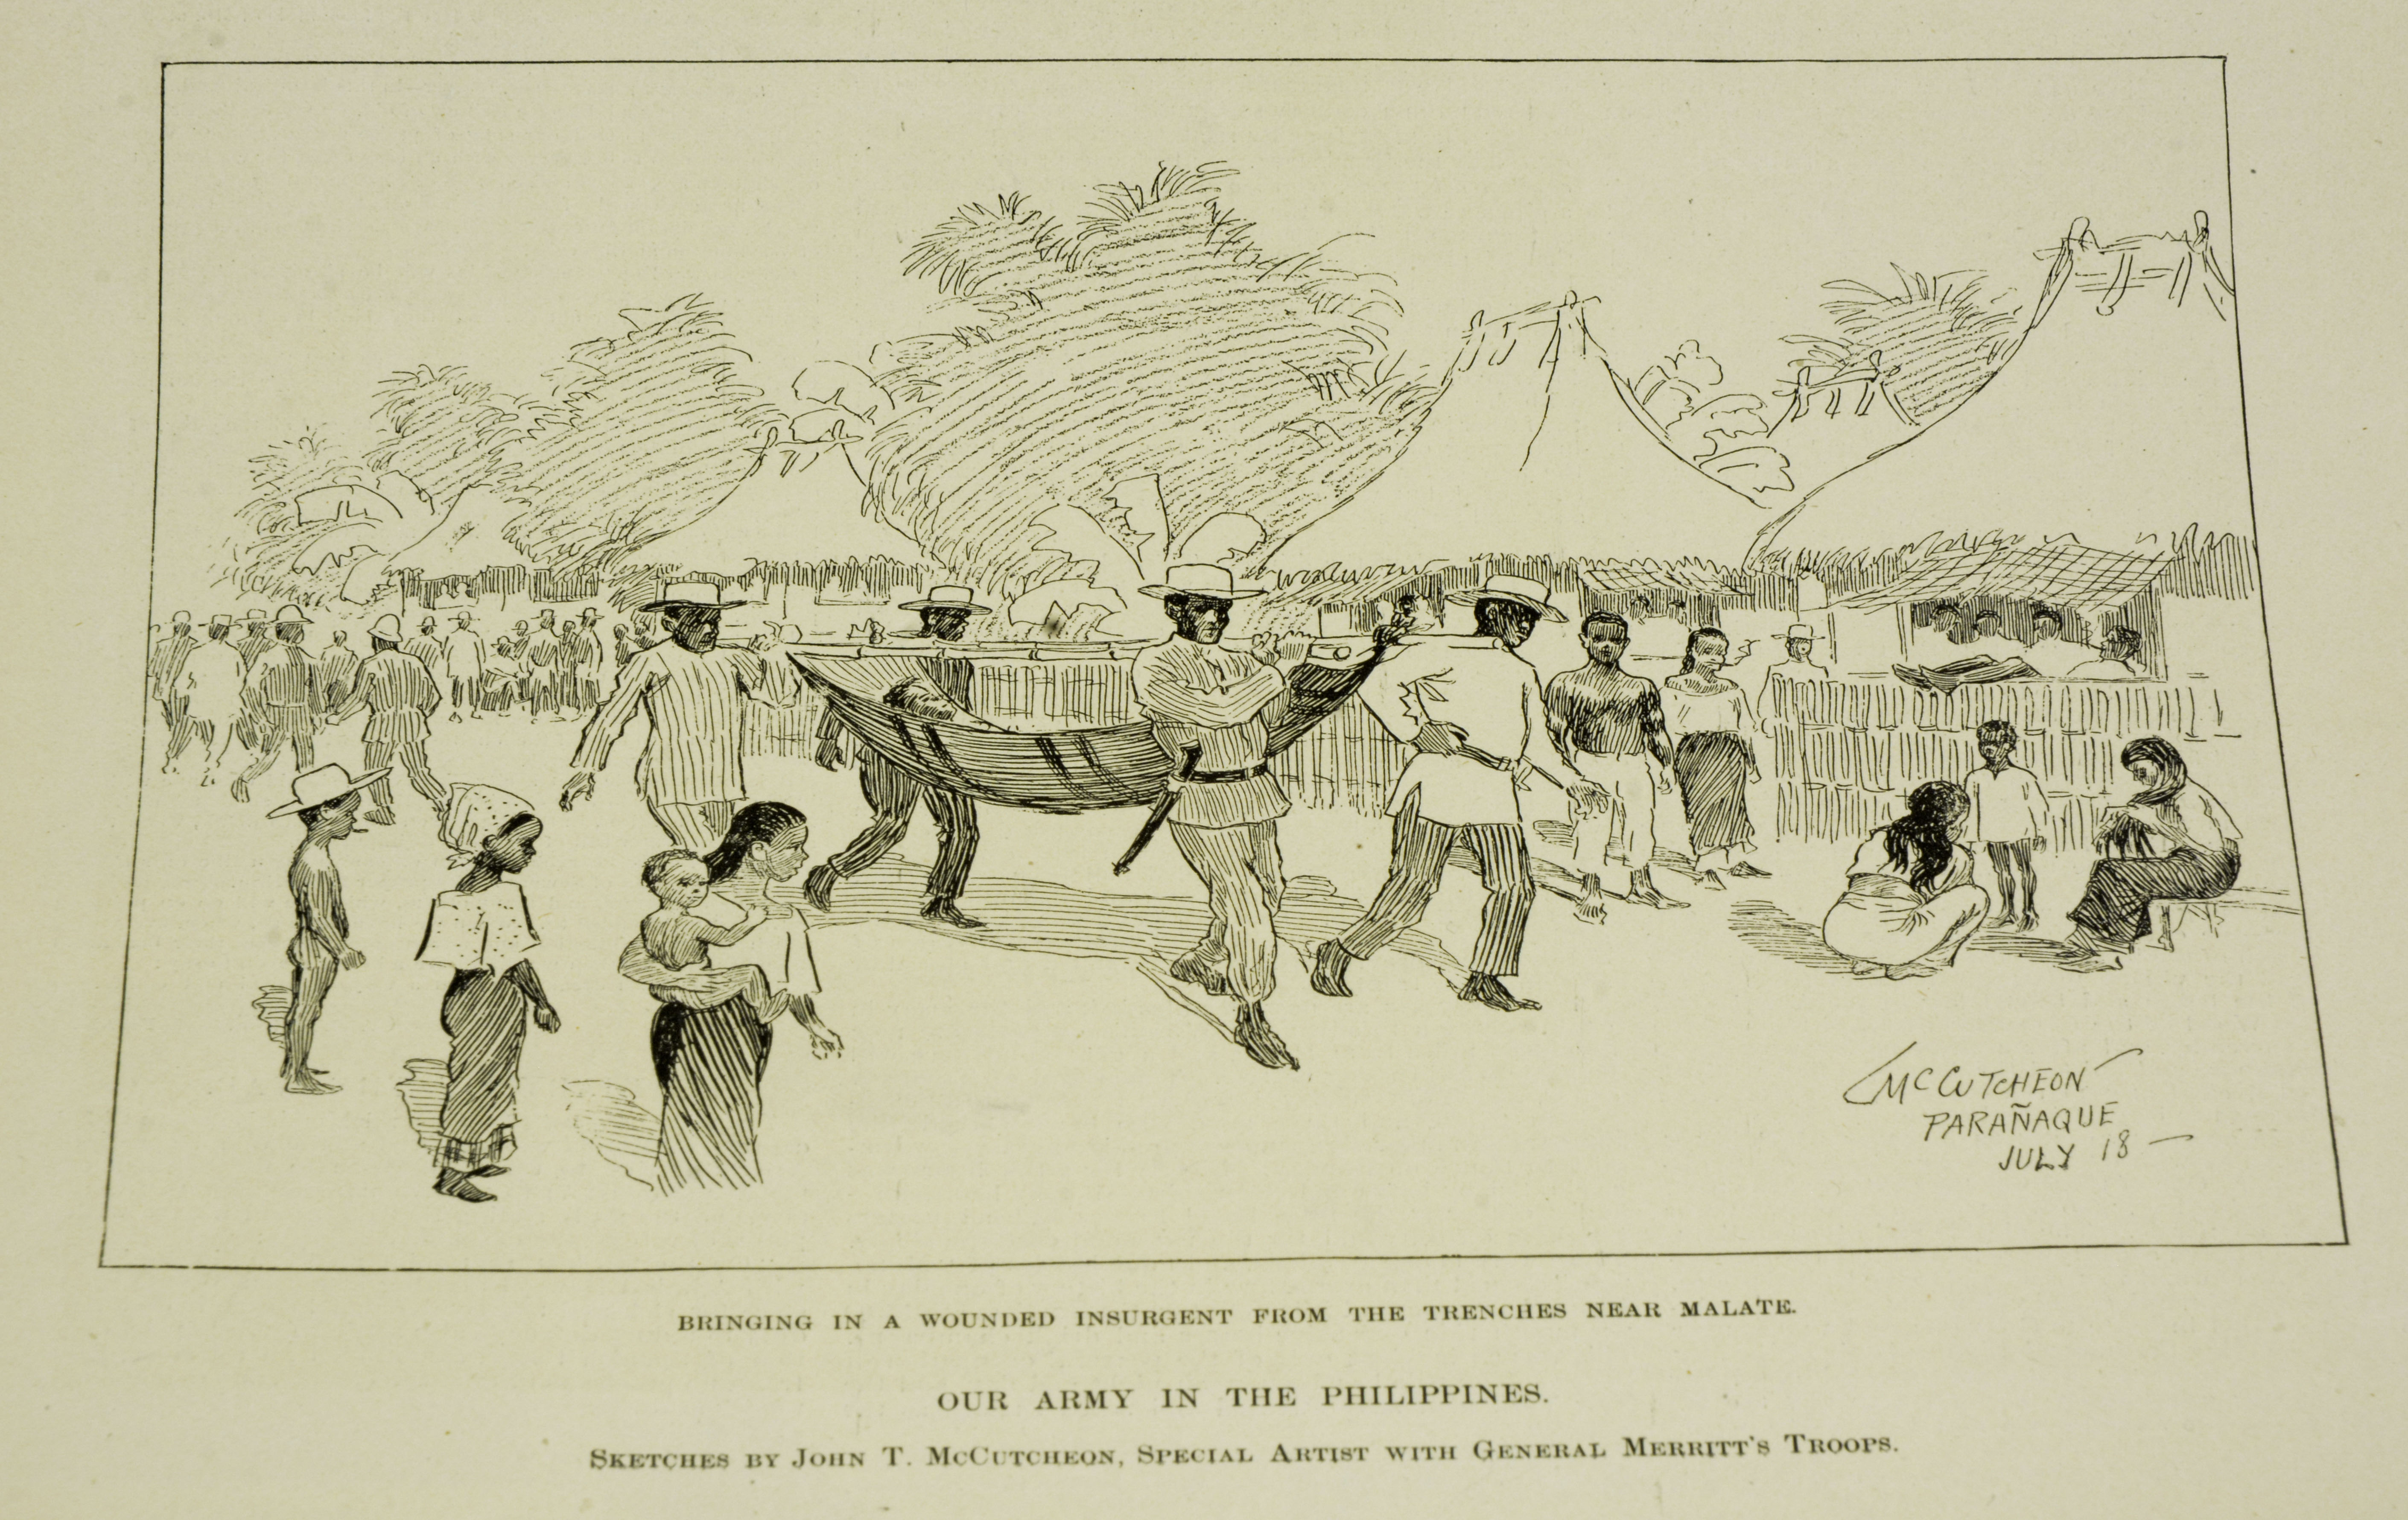 Illustration owned by Paulla SantosCreated in September 3, 1898Acquired in June 2017Acquired from Odana Antiques & Fine Arts Center, Madison, WI.Made in New York City, Harper’s Weekly. Harper & Brothers Publishers.Was purchasedIt is an illustrations of Filipinos carrying a wounded insurgent.English is used in the document.Importance: “It is important because it is amazing to own something that was created during a huge turning point in Philippine and US History.”Notes from Sarah Carlson, in discussion with Santos: “[I] Like to go antiquing, found some did publications of the Philippines History Student - studying transnational marriages between PI and USA. Amazing to find a PI object in the Midwest. Different sellers throughoutantique shop seller got it at garage sale. Got it last month, saving money to frame right now in a bag. Confusing caption - who are “our army” who is the “Insurgent”. Taking a summer intern program at Madison, class trip to Chicago. Went on collections tour, heardabout digitization. Connects two parents’ history family history which inspired research connection to the Philippines, found in Midwest.Any views, findings, conclusions, or recommendations expressed in this story do not necessarily represent those of the National Endowment for the Humanities. (c) Field Museum of Natural History - CC BY-NC 4.0